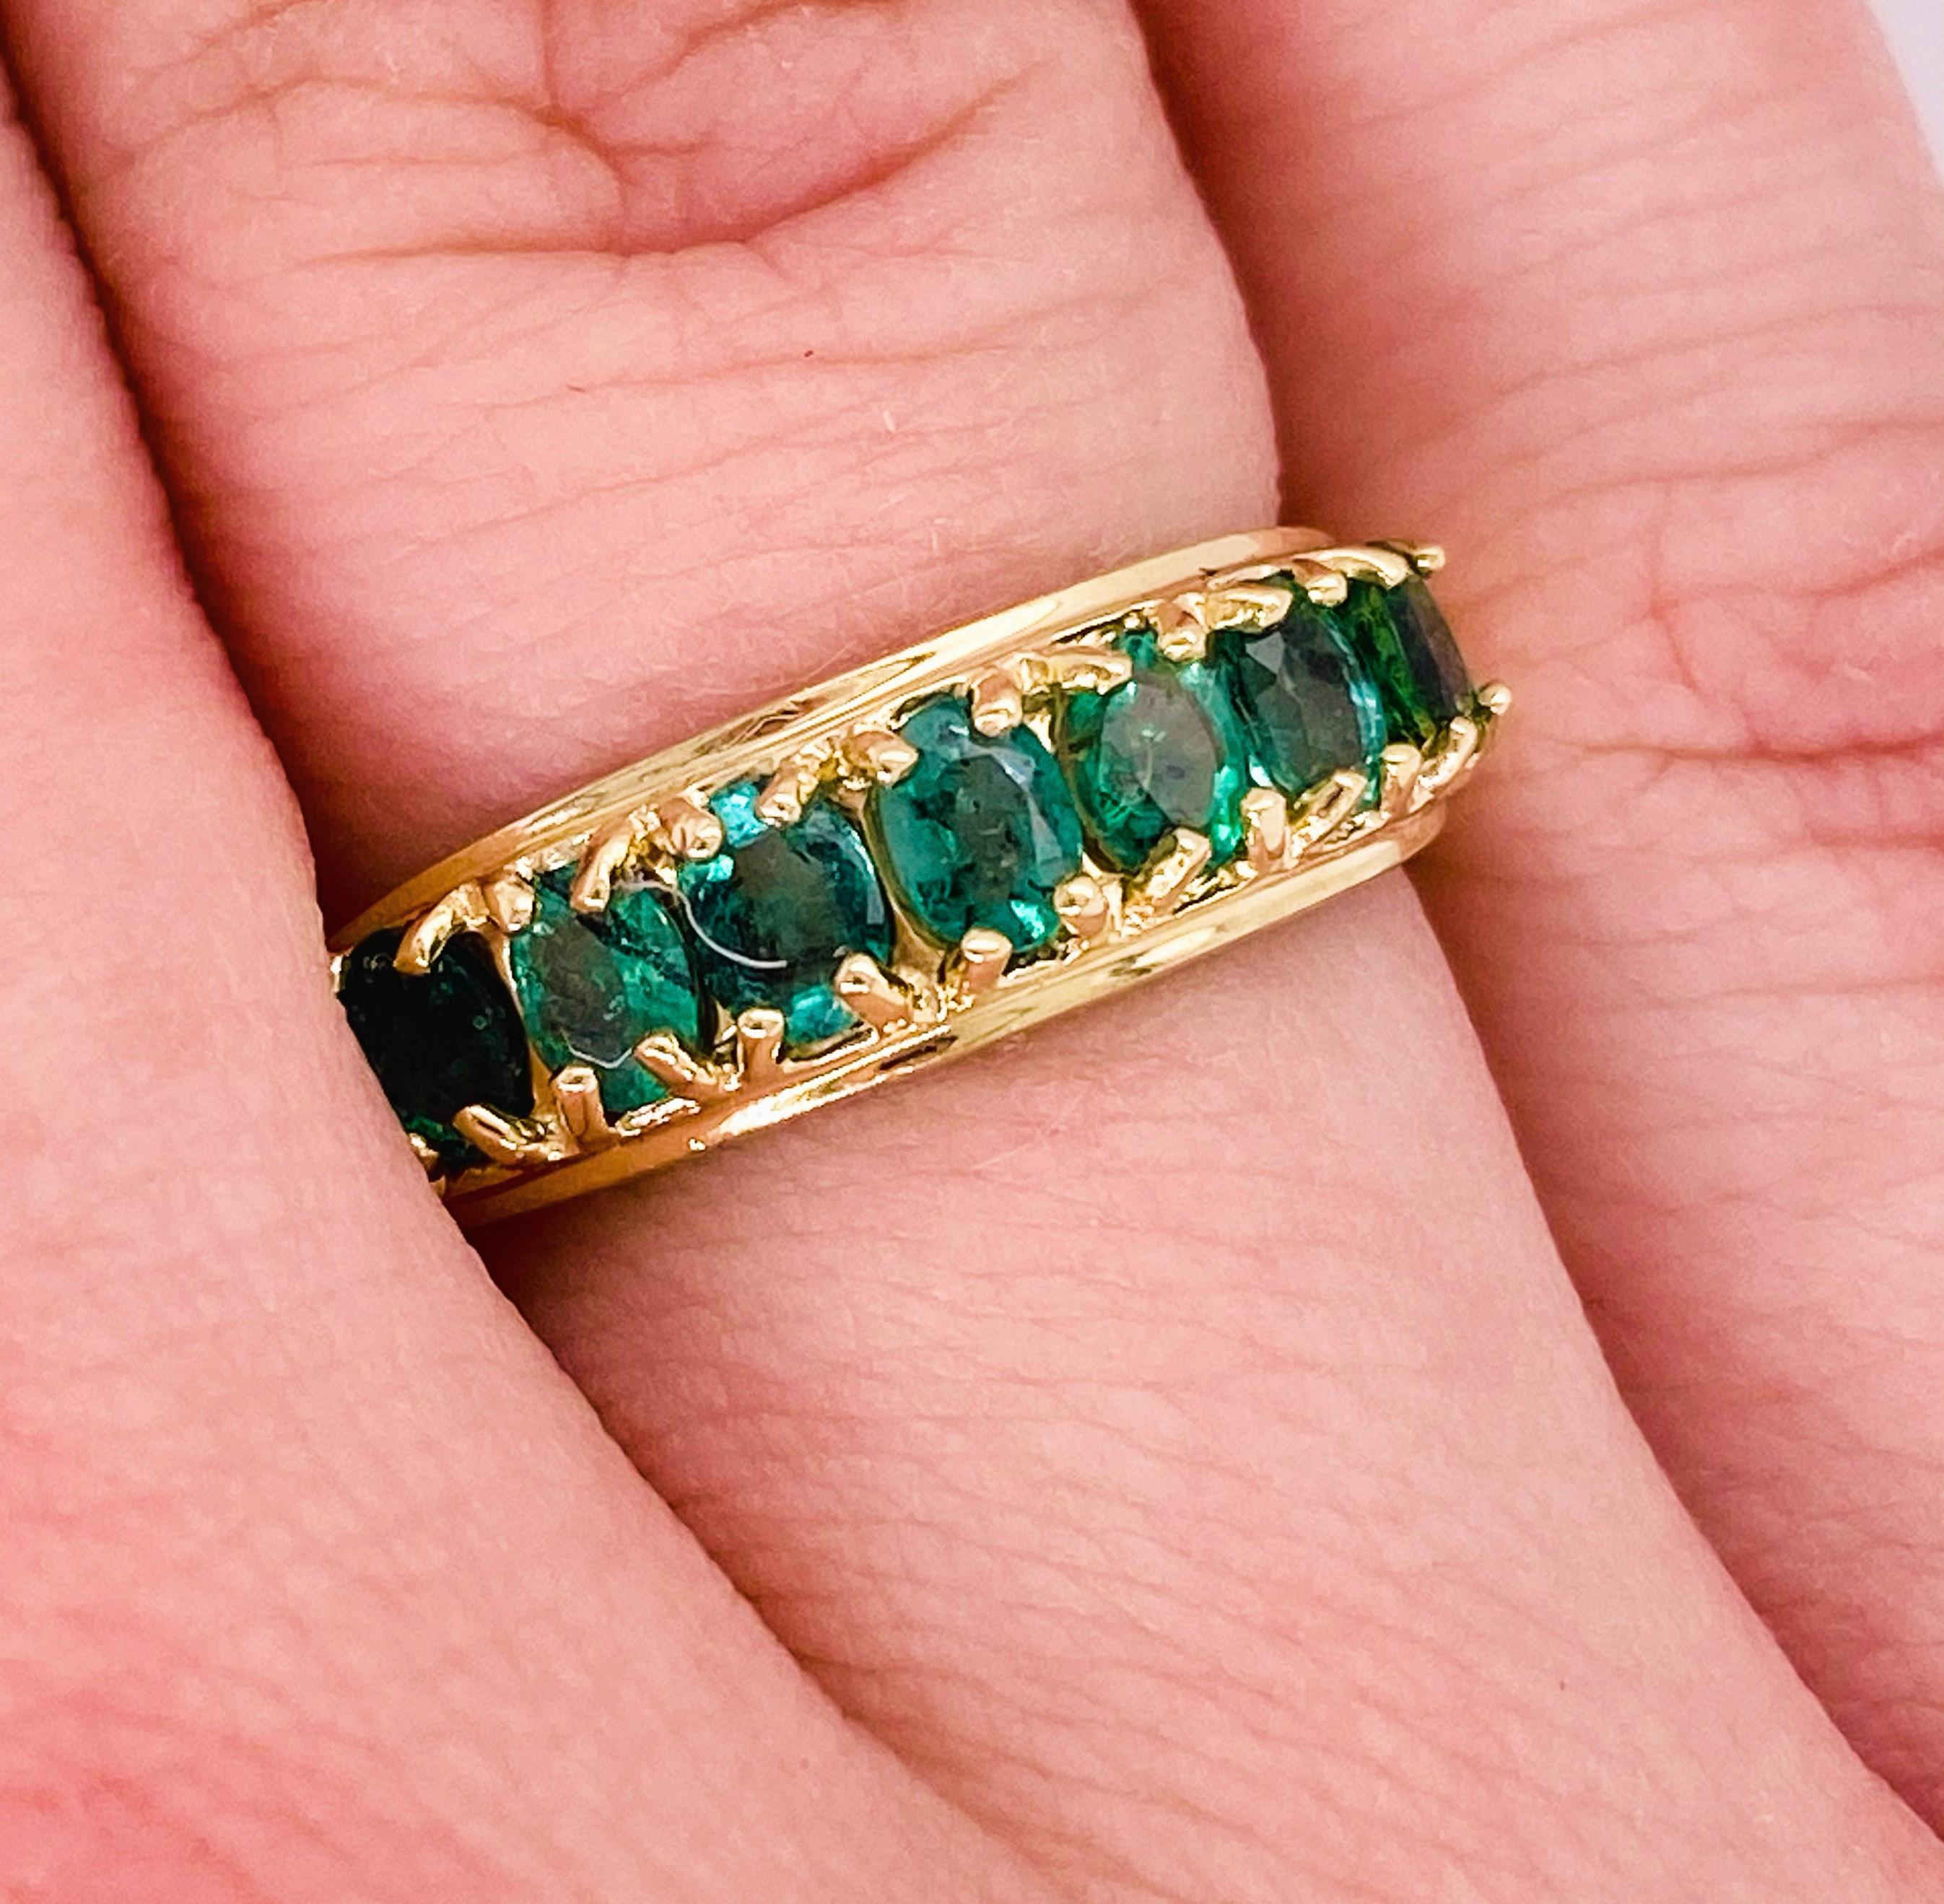 Seven vibrant emeralds have never looked better! This emerald band has genuine, natural emerald gemstones. The stones are set in a 10 karat yellow gold band! Emeralds are the birthstone for May, making this ring the perfect birthday or anniversary